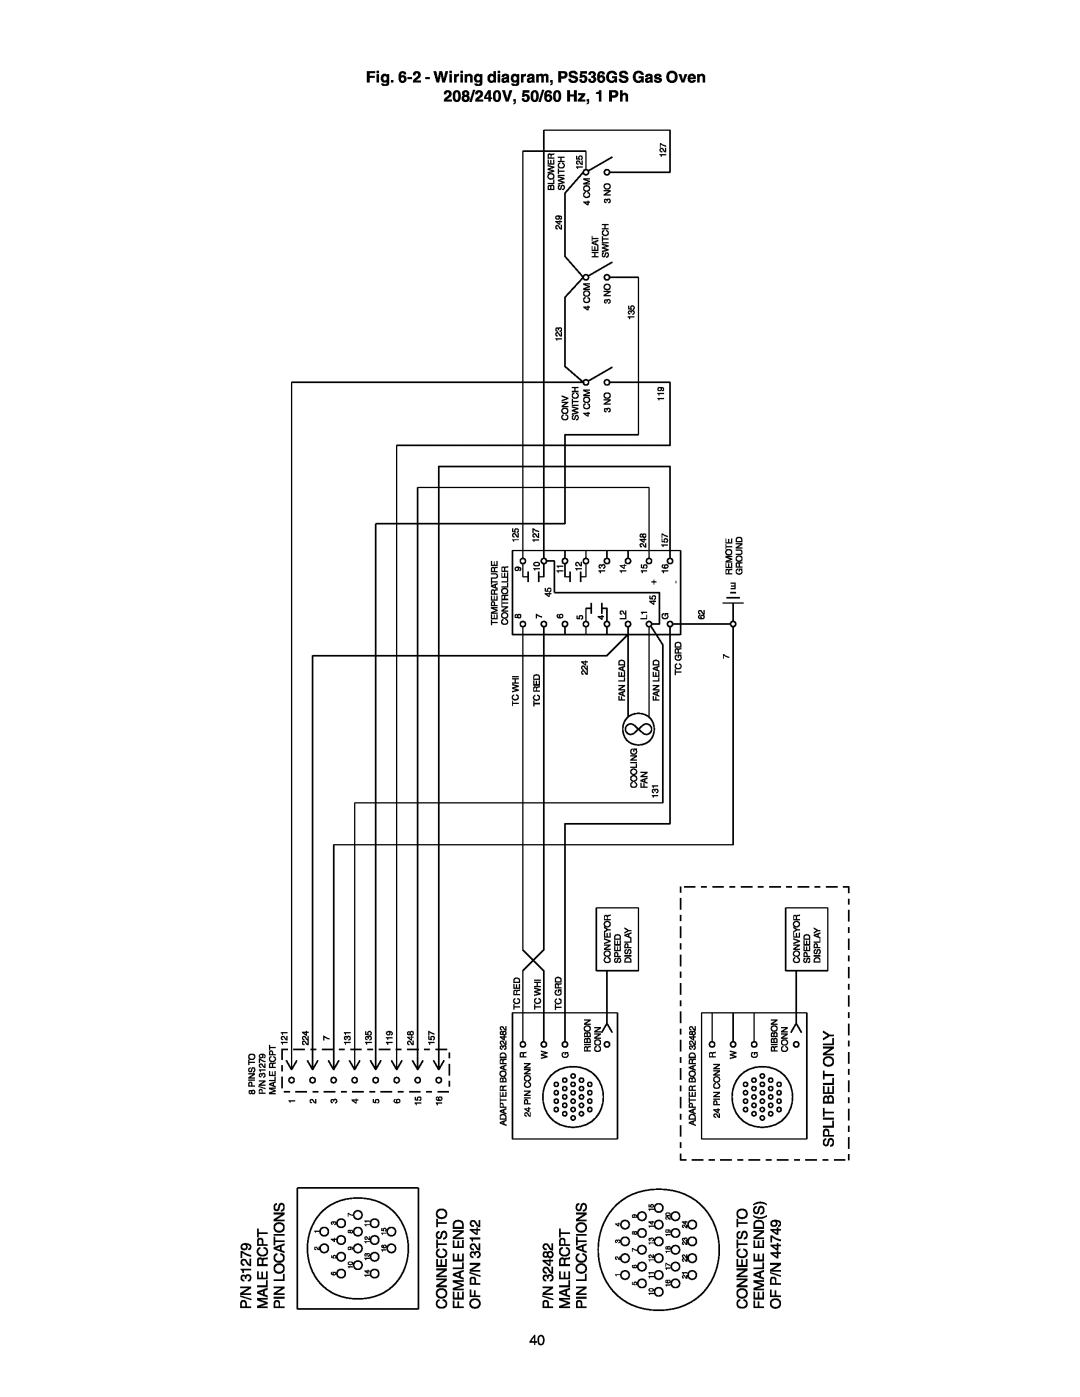 Middleby Marshall PS53GS Gas manual 2 - Wiring diagram, PS536GS Gas Oven 208/240V, 50/60 Hz, 1 Ph 